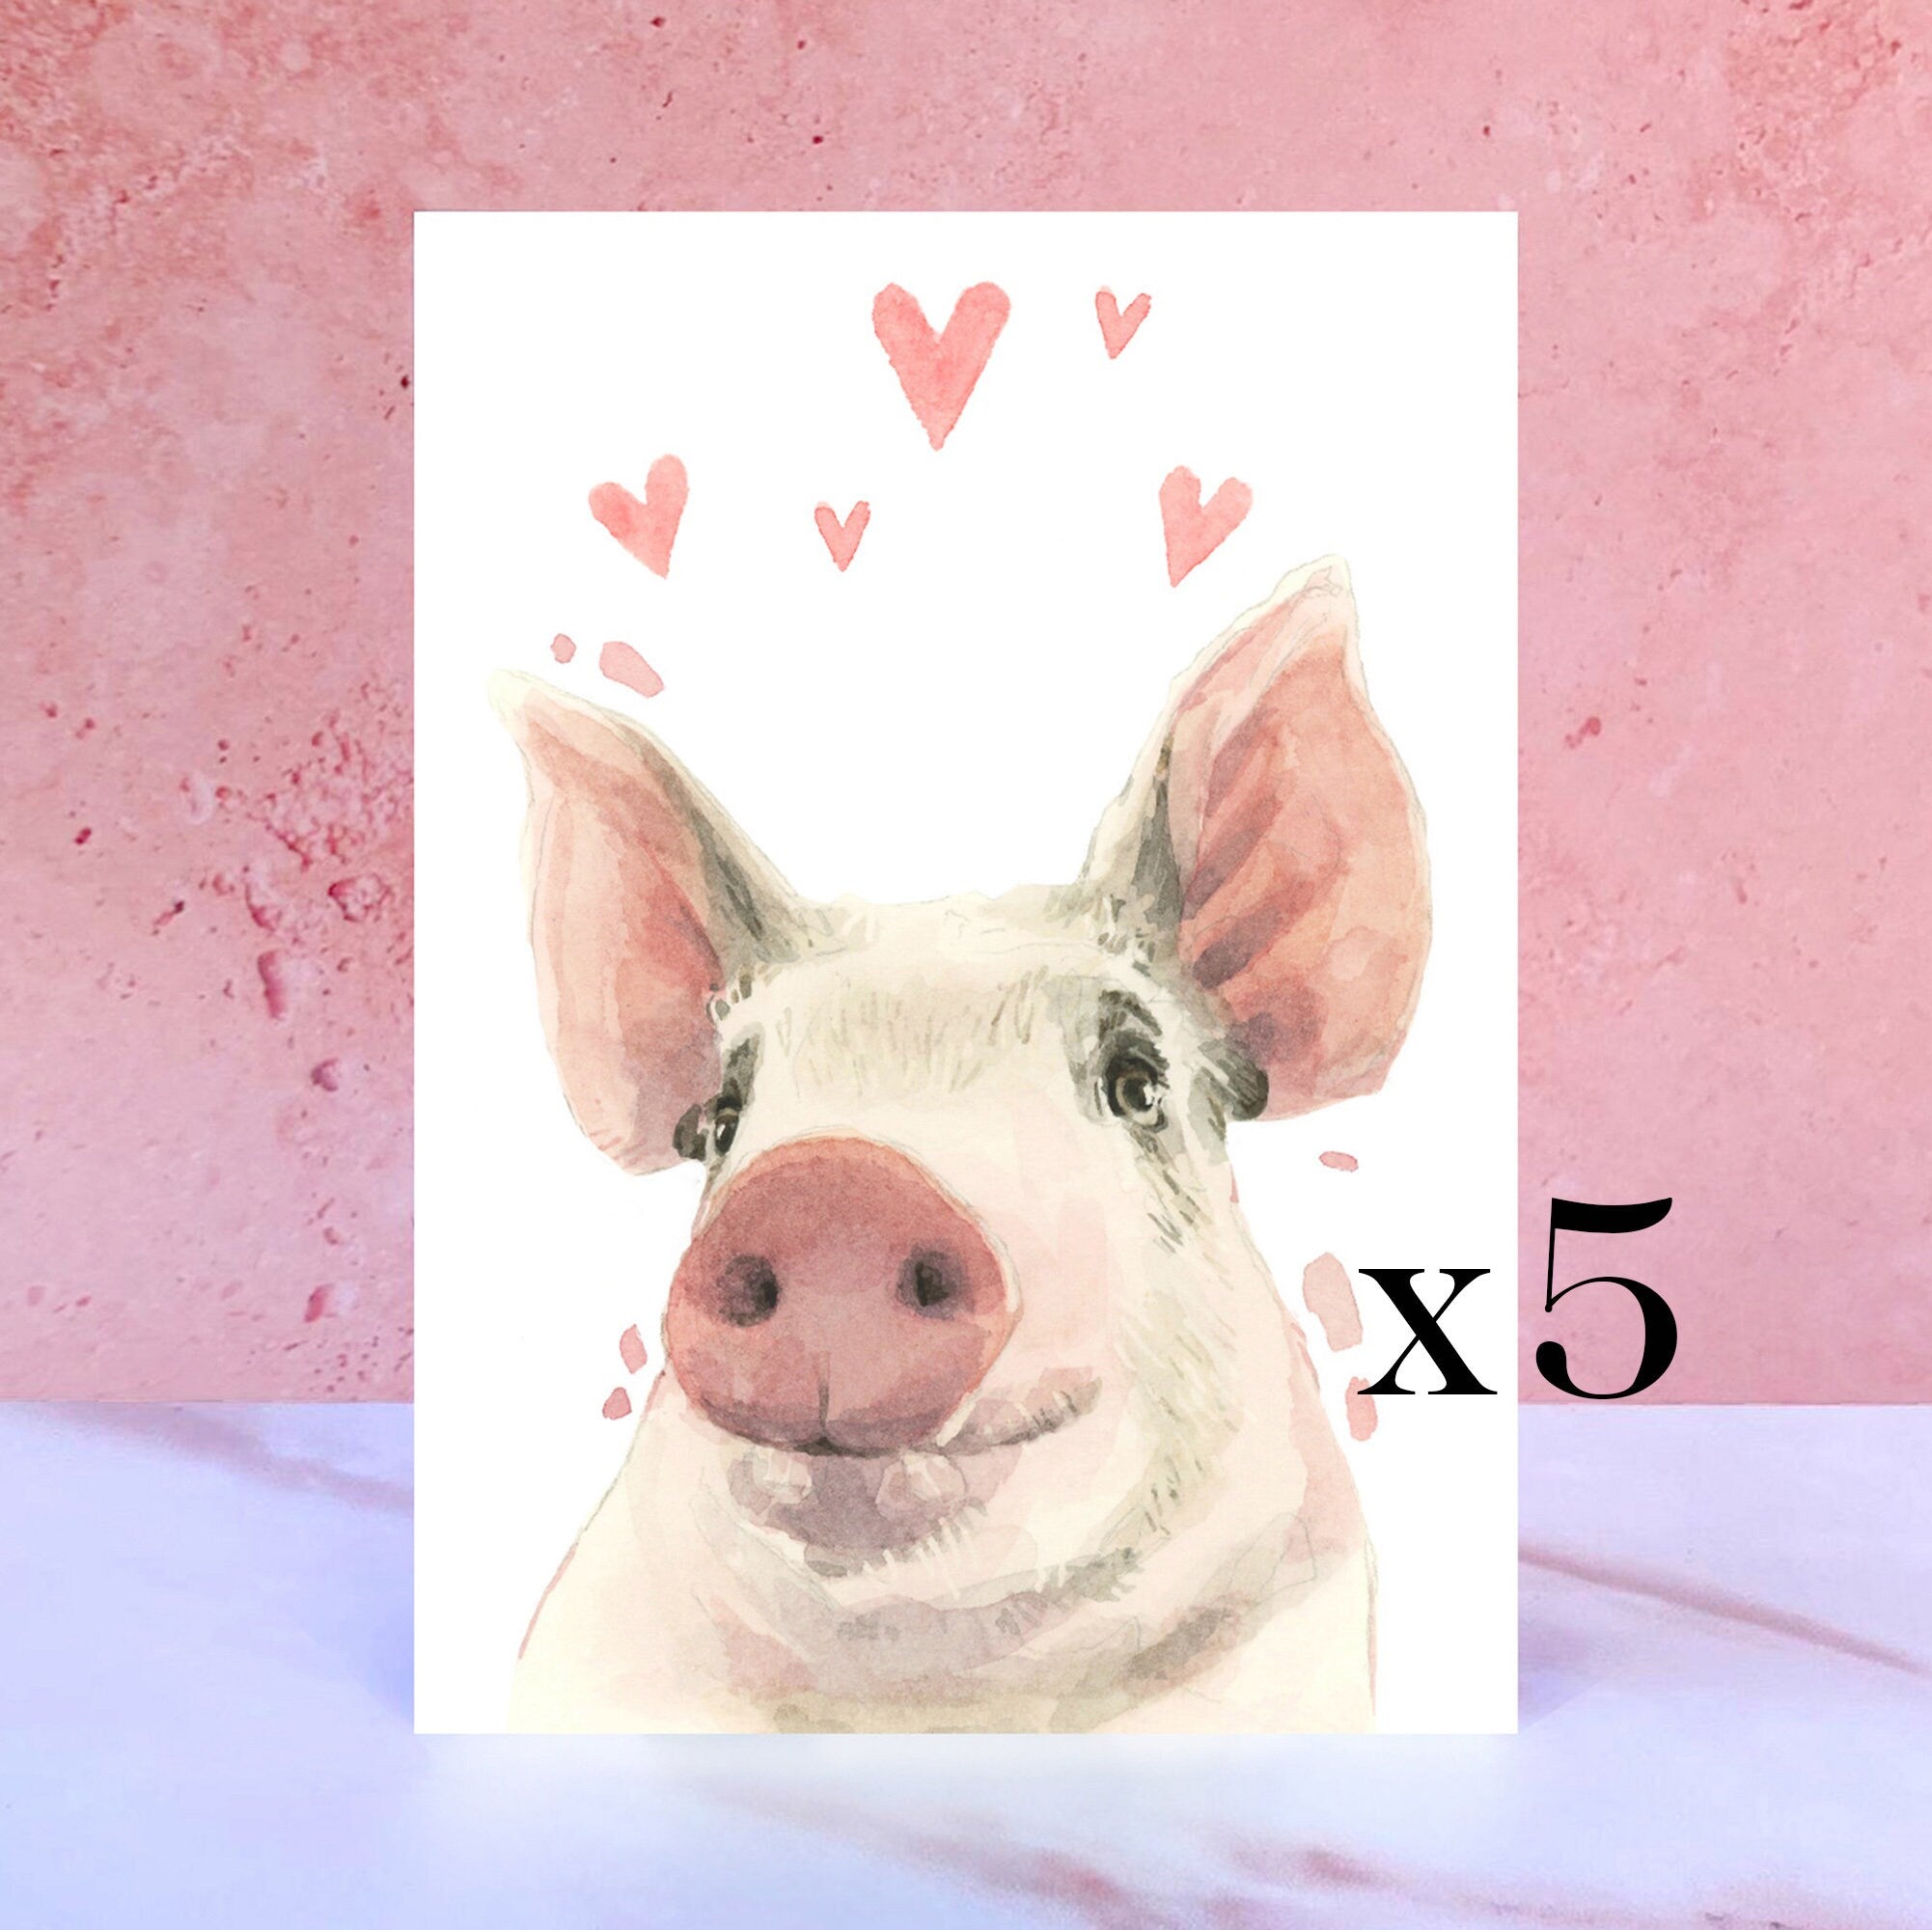 Pack of 5 Pig Licks & Kisses Card for Valentines and Anniversaries from the Farm Animal Collection